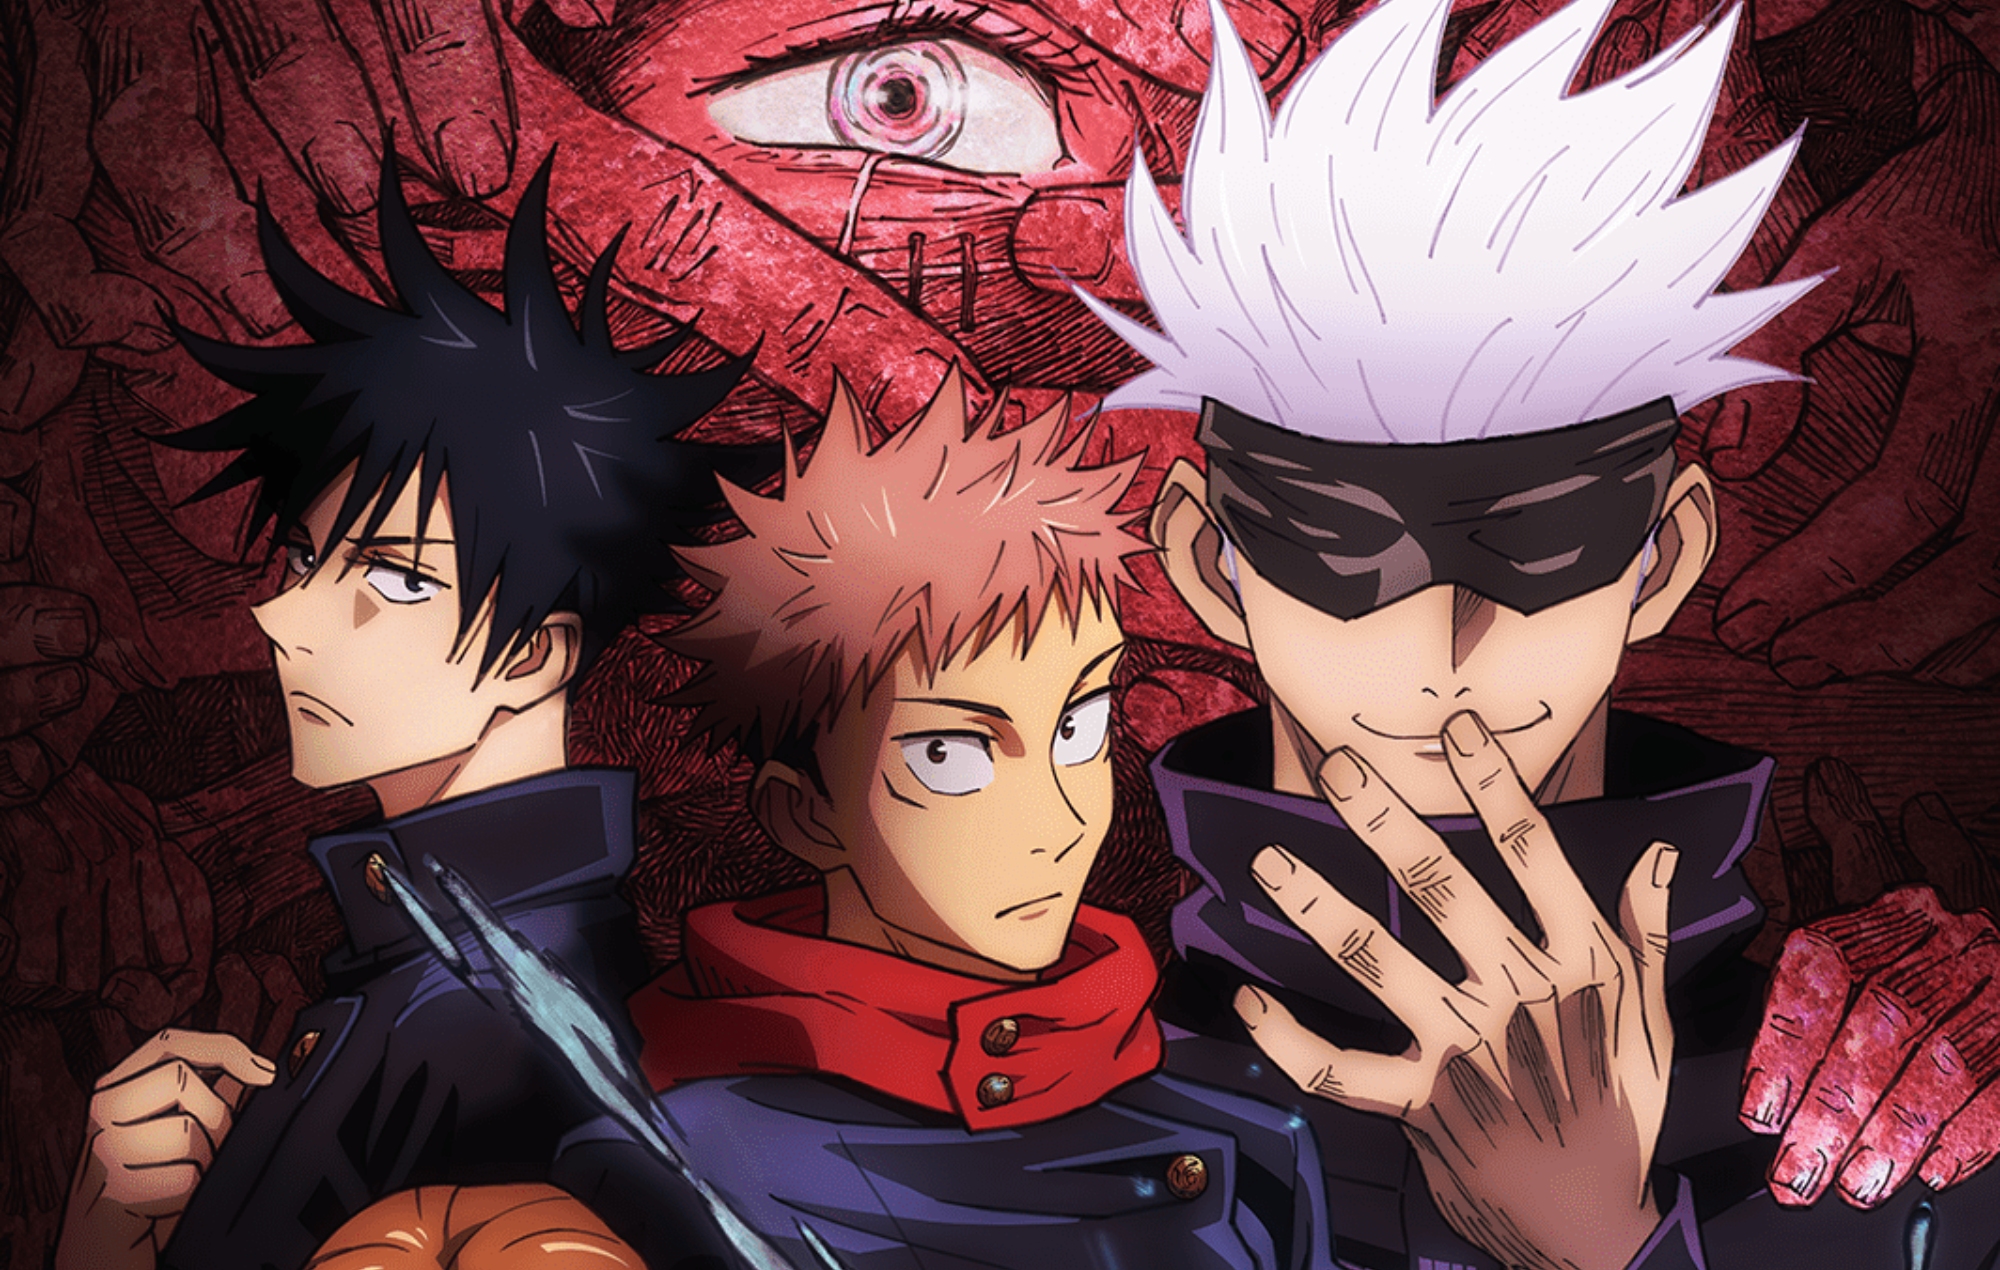 Jujutsu Kaisen Season 2 Unveiled: The Supernatural Saga Continues on Netflix and Crunchyroll, but Not Hulu - Here’s Your Guide to the Enchanting World and Where to Watch It